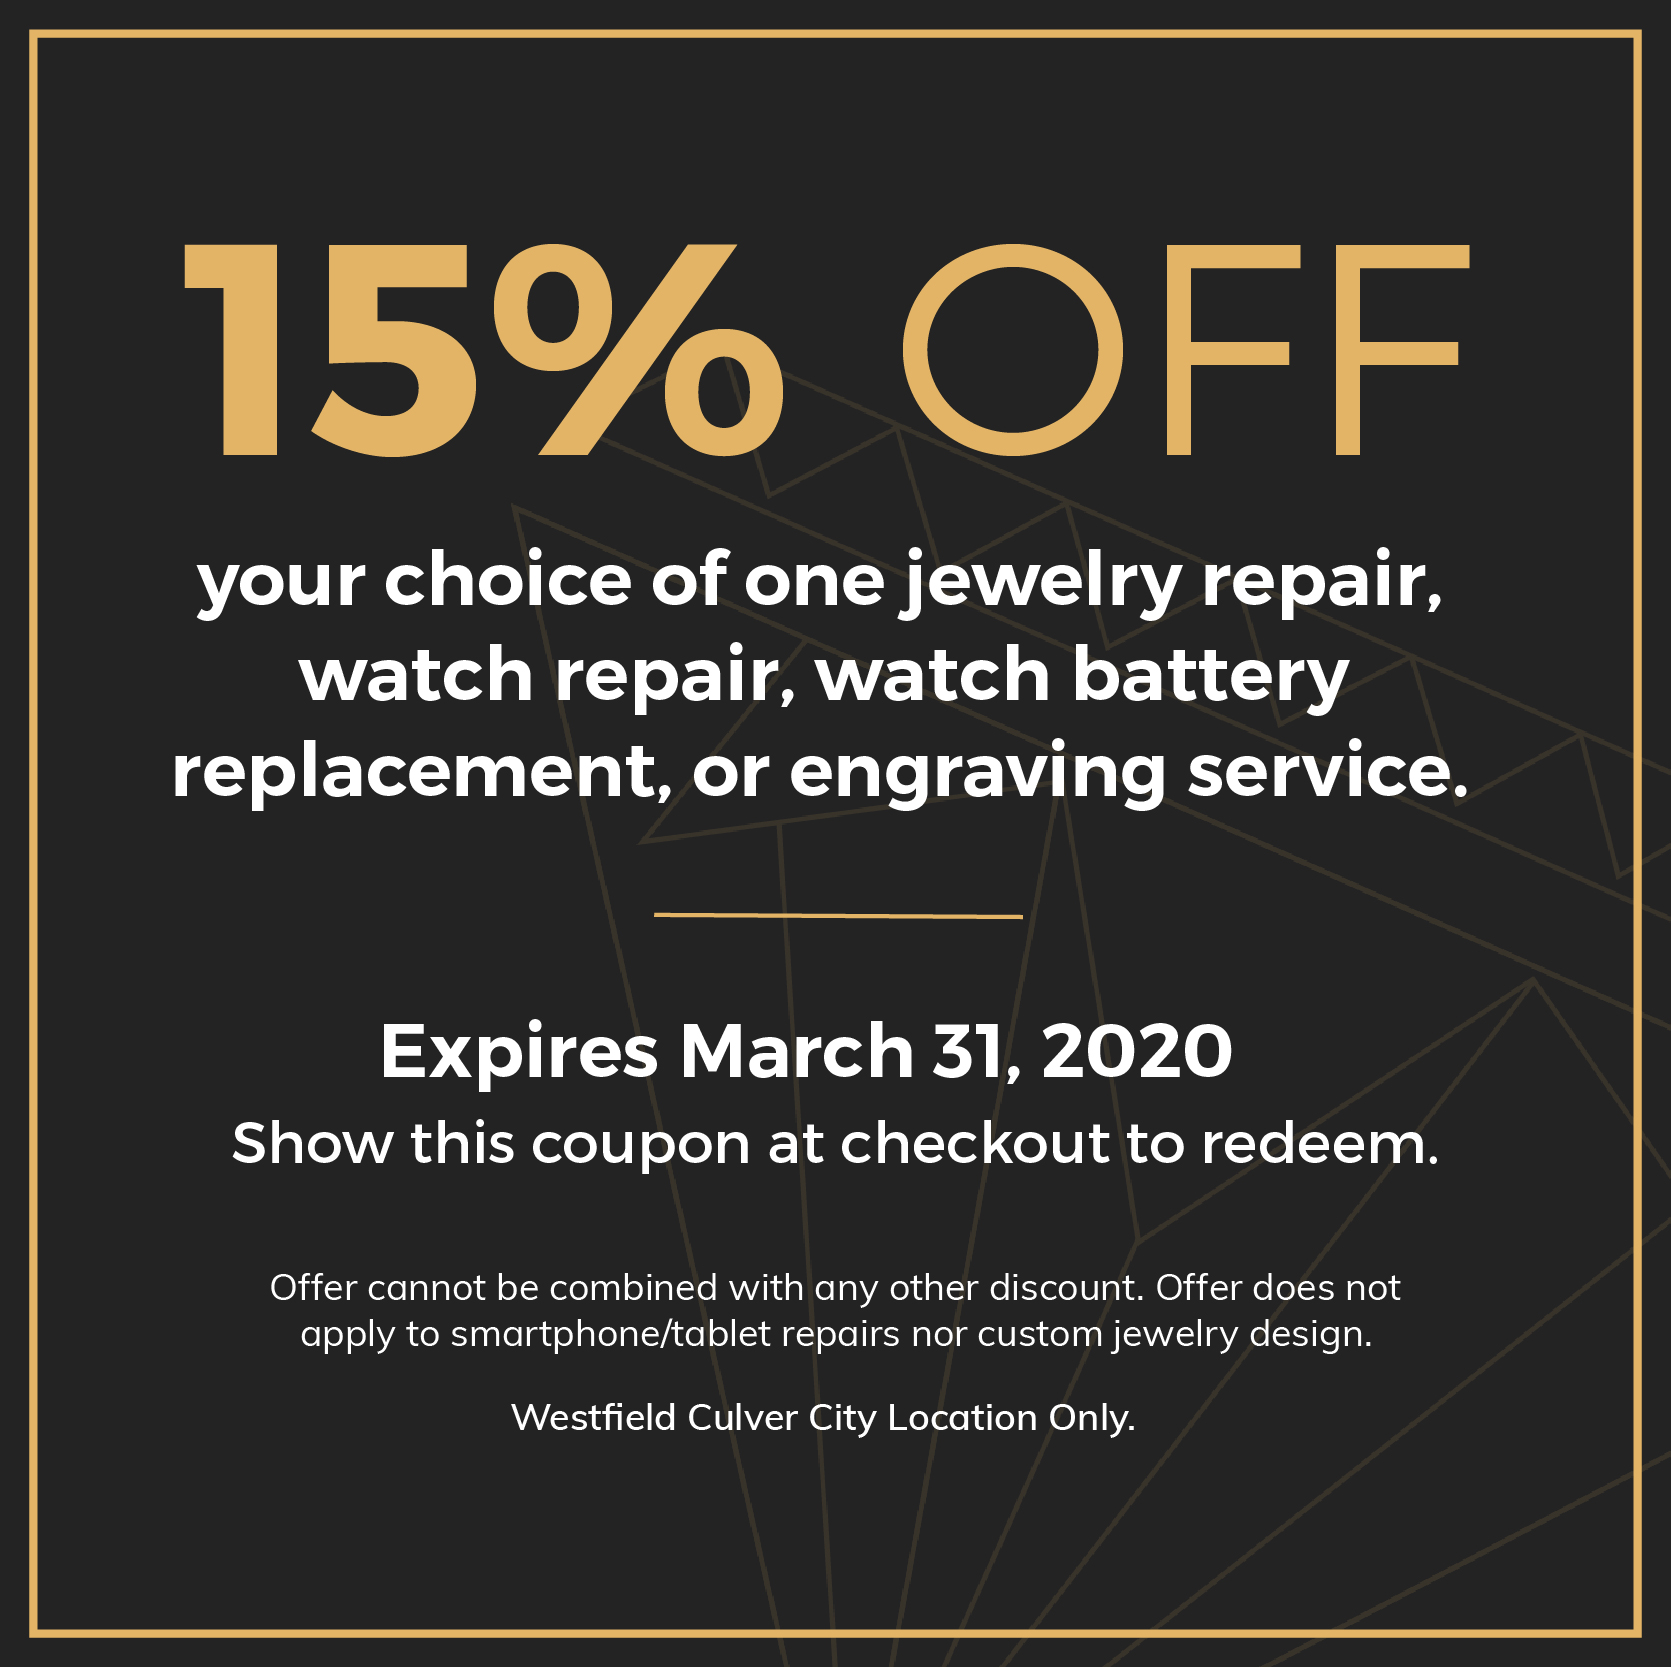 15% OFF. your choice of one jewelry repair, watch repair, watch battery replacement, or engraving service. Expires March 31, 2020. Show this coupon at checkout to redeem. Offer cannot be combined with any other discount. Offer does not apply to smartphone/tablet repairs nor custom jewelry design. Westfield Culver City Location Only.